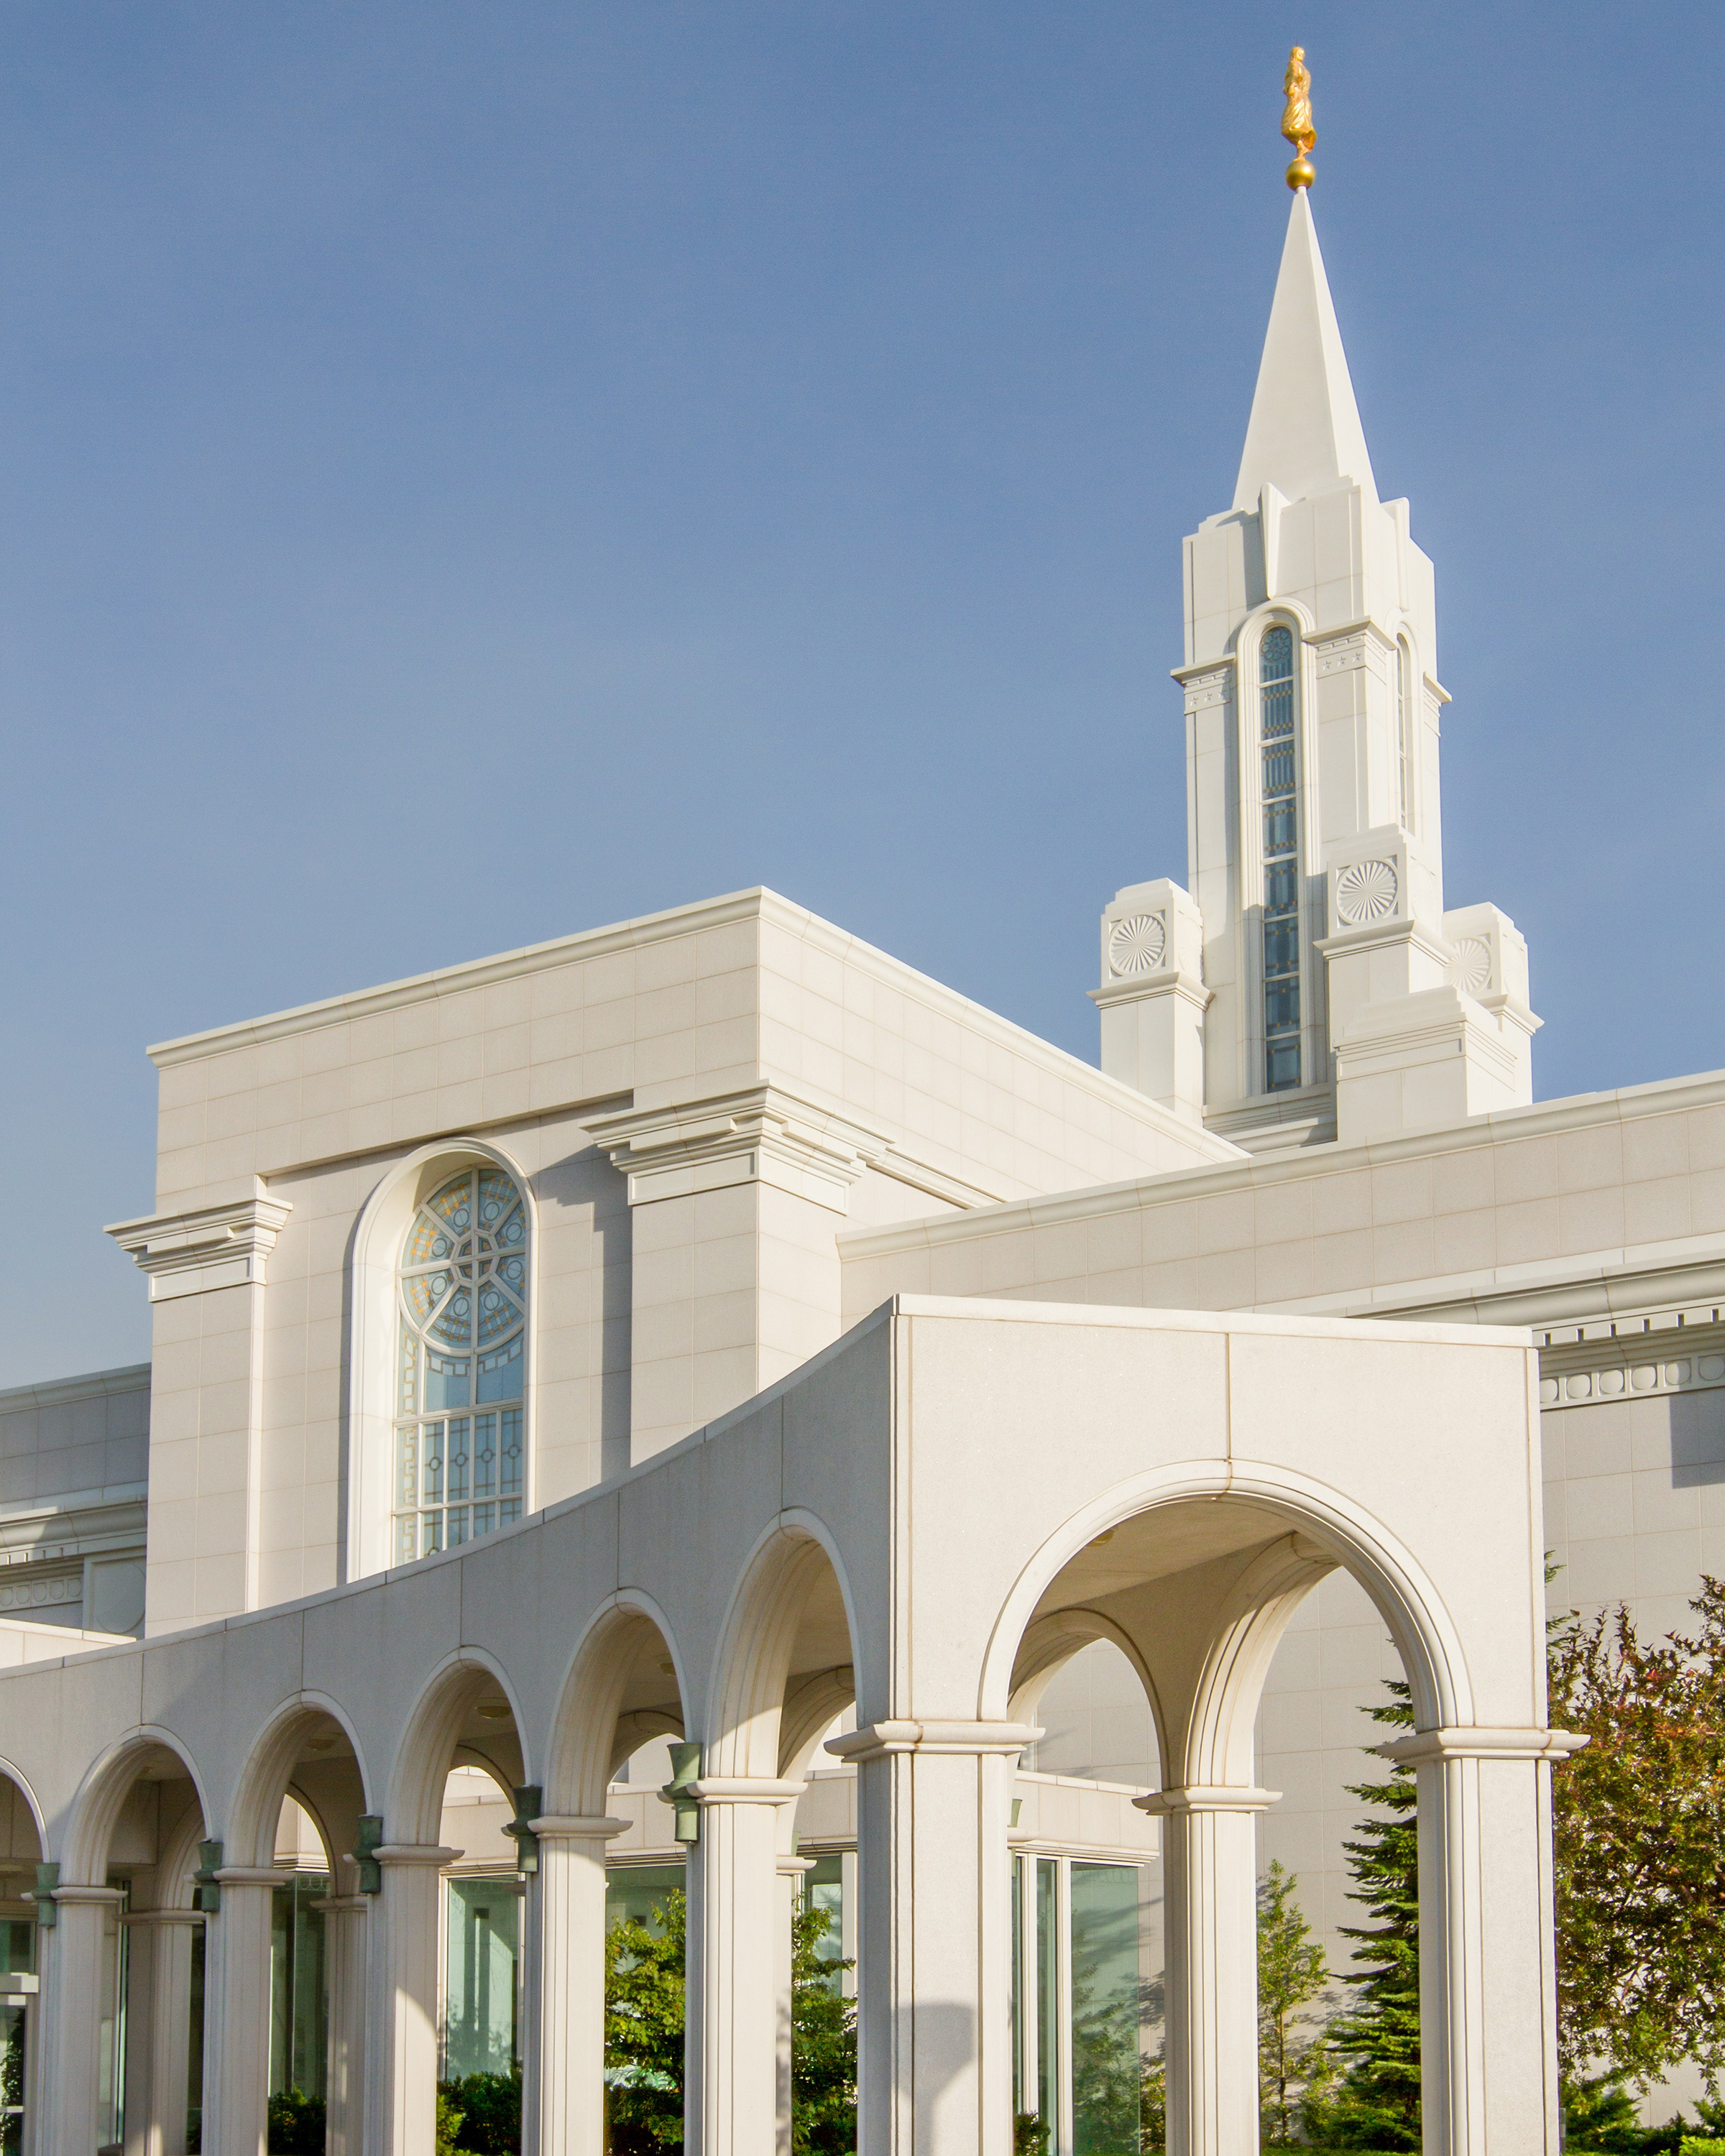 The Entrance to the Bountiful Utah Temple